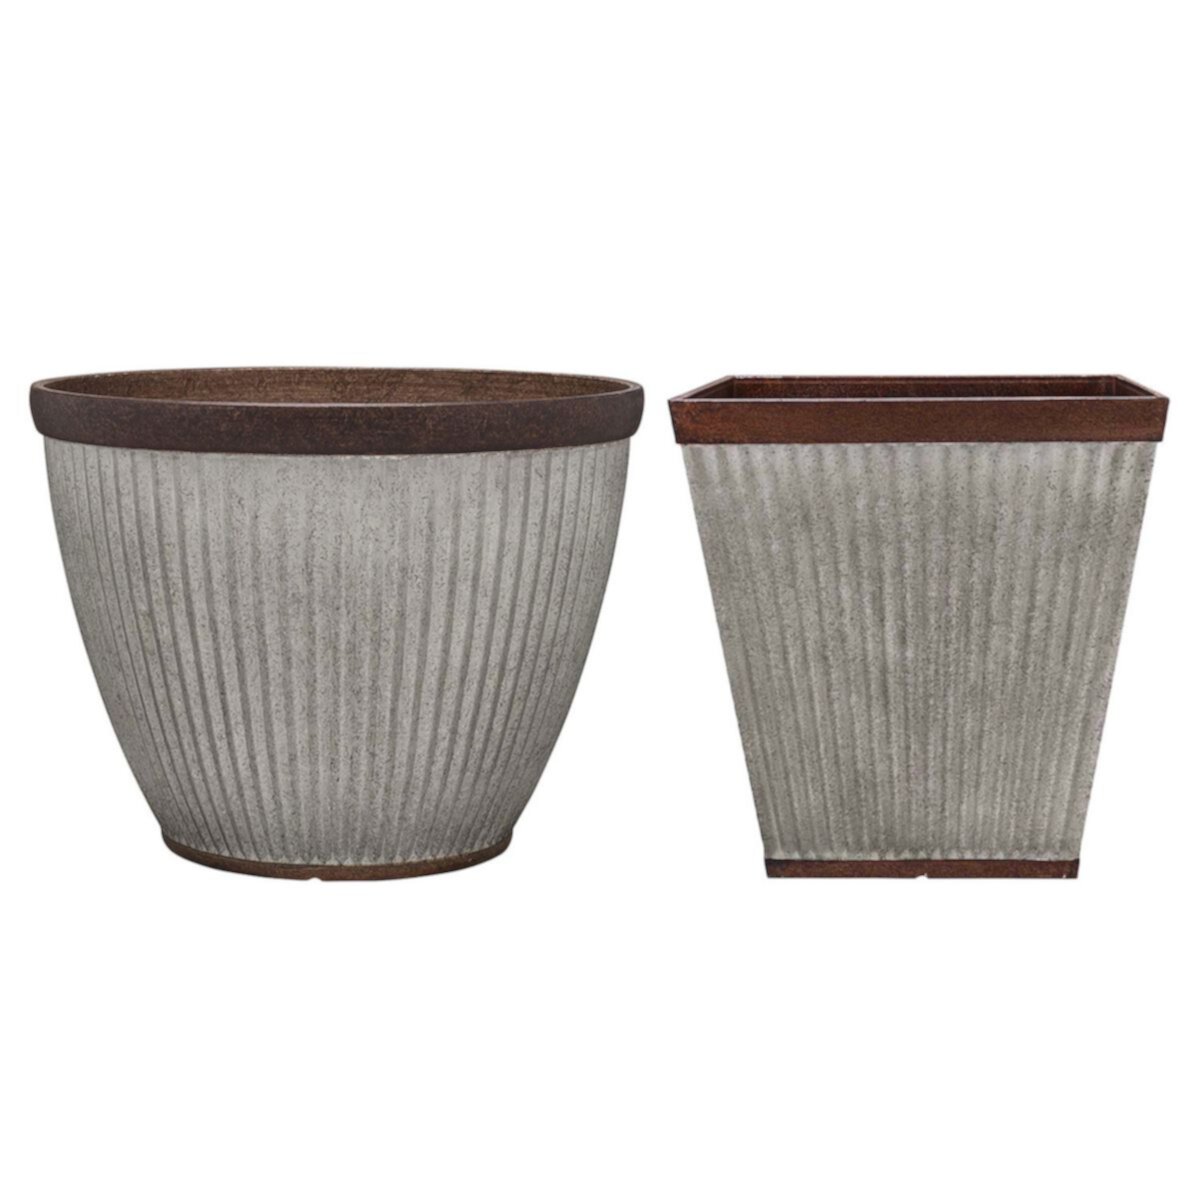 Southern Patio HDR-046868 20.5 Inch Diameter Rustic Resin Outdoor Planter Urn + Southern Patio HDR-046851 16 Inch Square Rustic Resin Outdoor Box Flower Planter Southern Patio